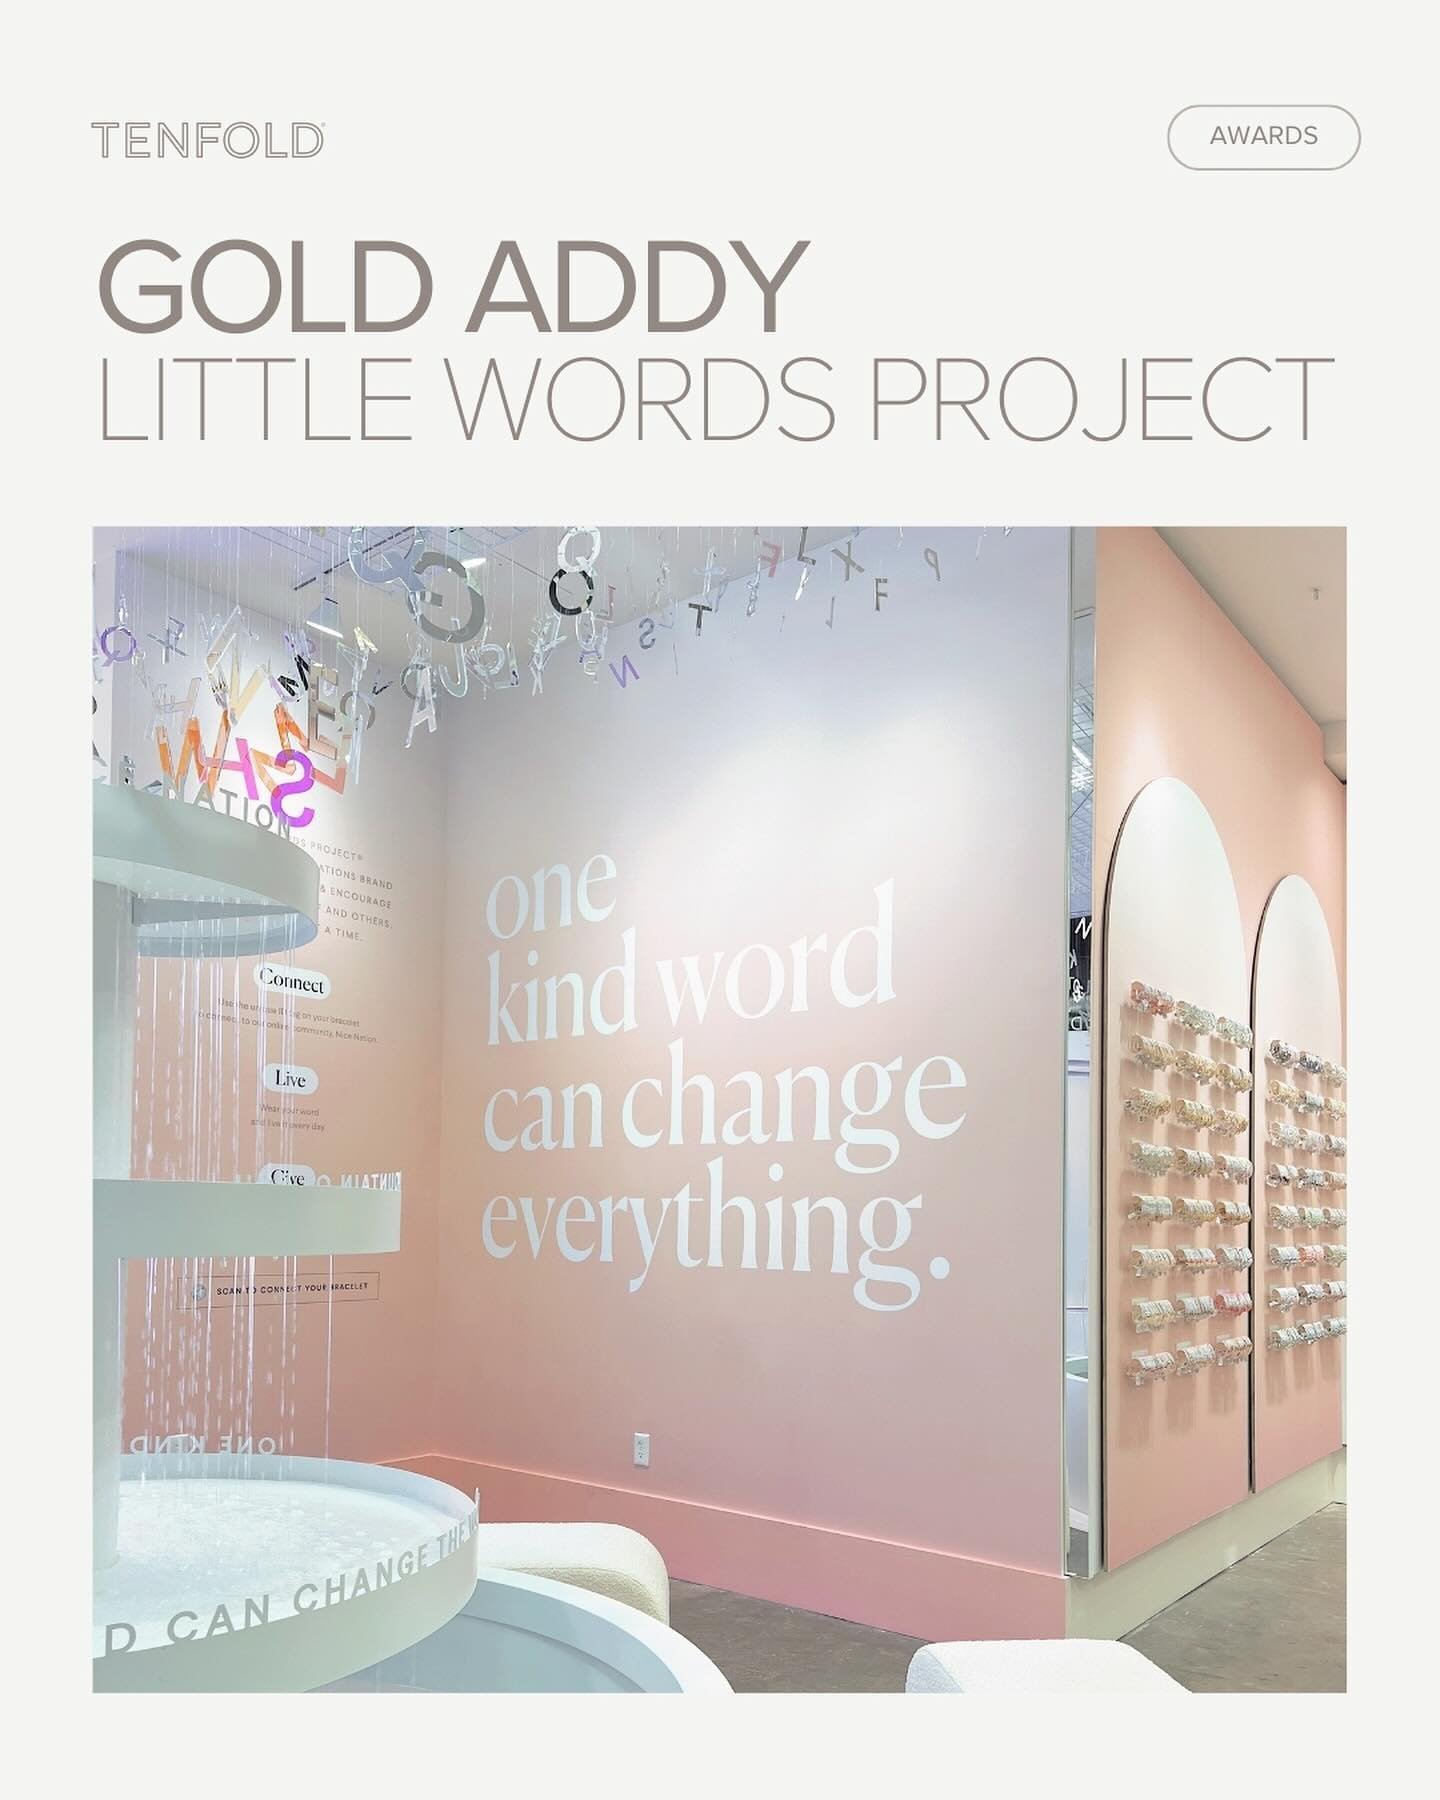 Kind Words are golden 🥇 and brought home a Gold ADDY!&nbsp;

Our vision from the beginning was to help Little Words Project disrupt traditional retail with an experience-forward concept, from beading your own bracelet, to leaving something kind behi